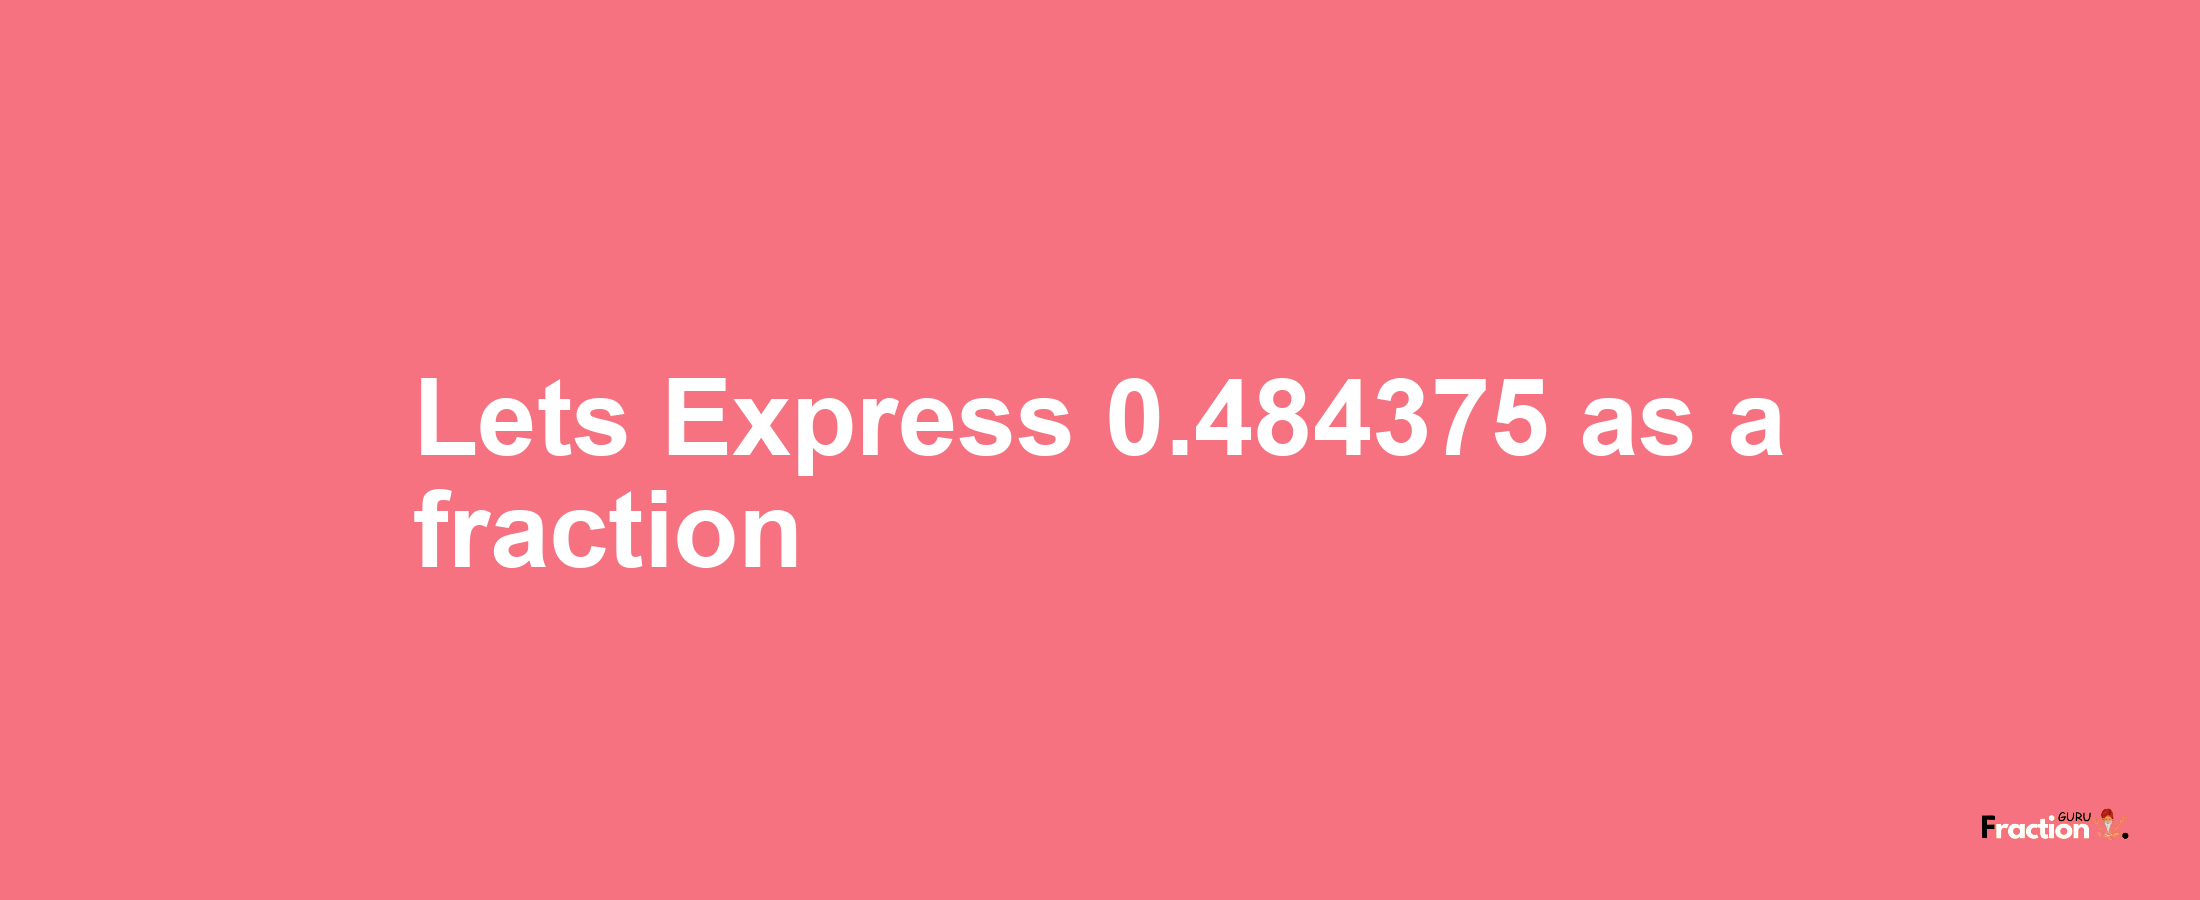 Lets Express 0.484375 as afraction